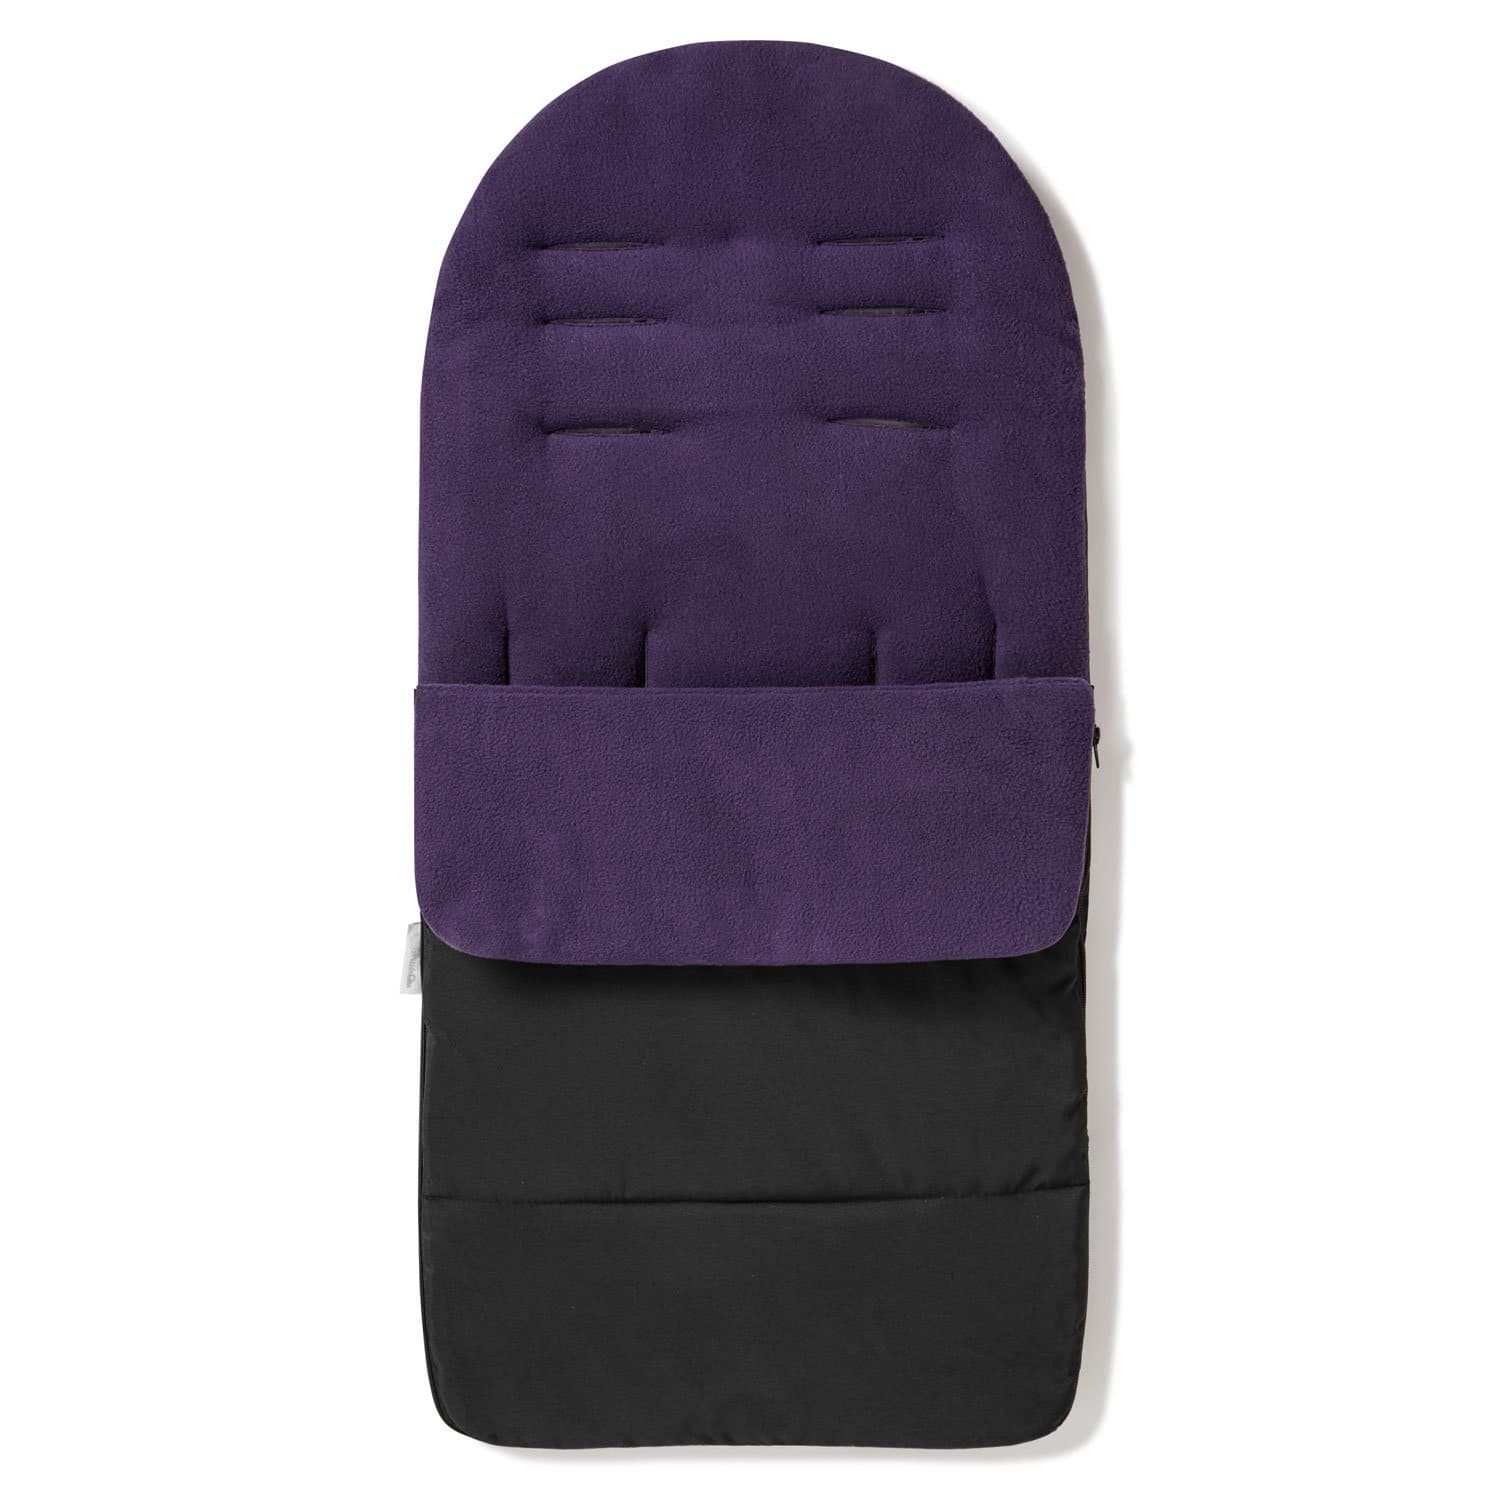 Premium Footmuff / Cosy Toes Compatible with Kiddicare - Plum Purple / Fits All Models | For Your Little One